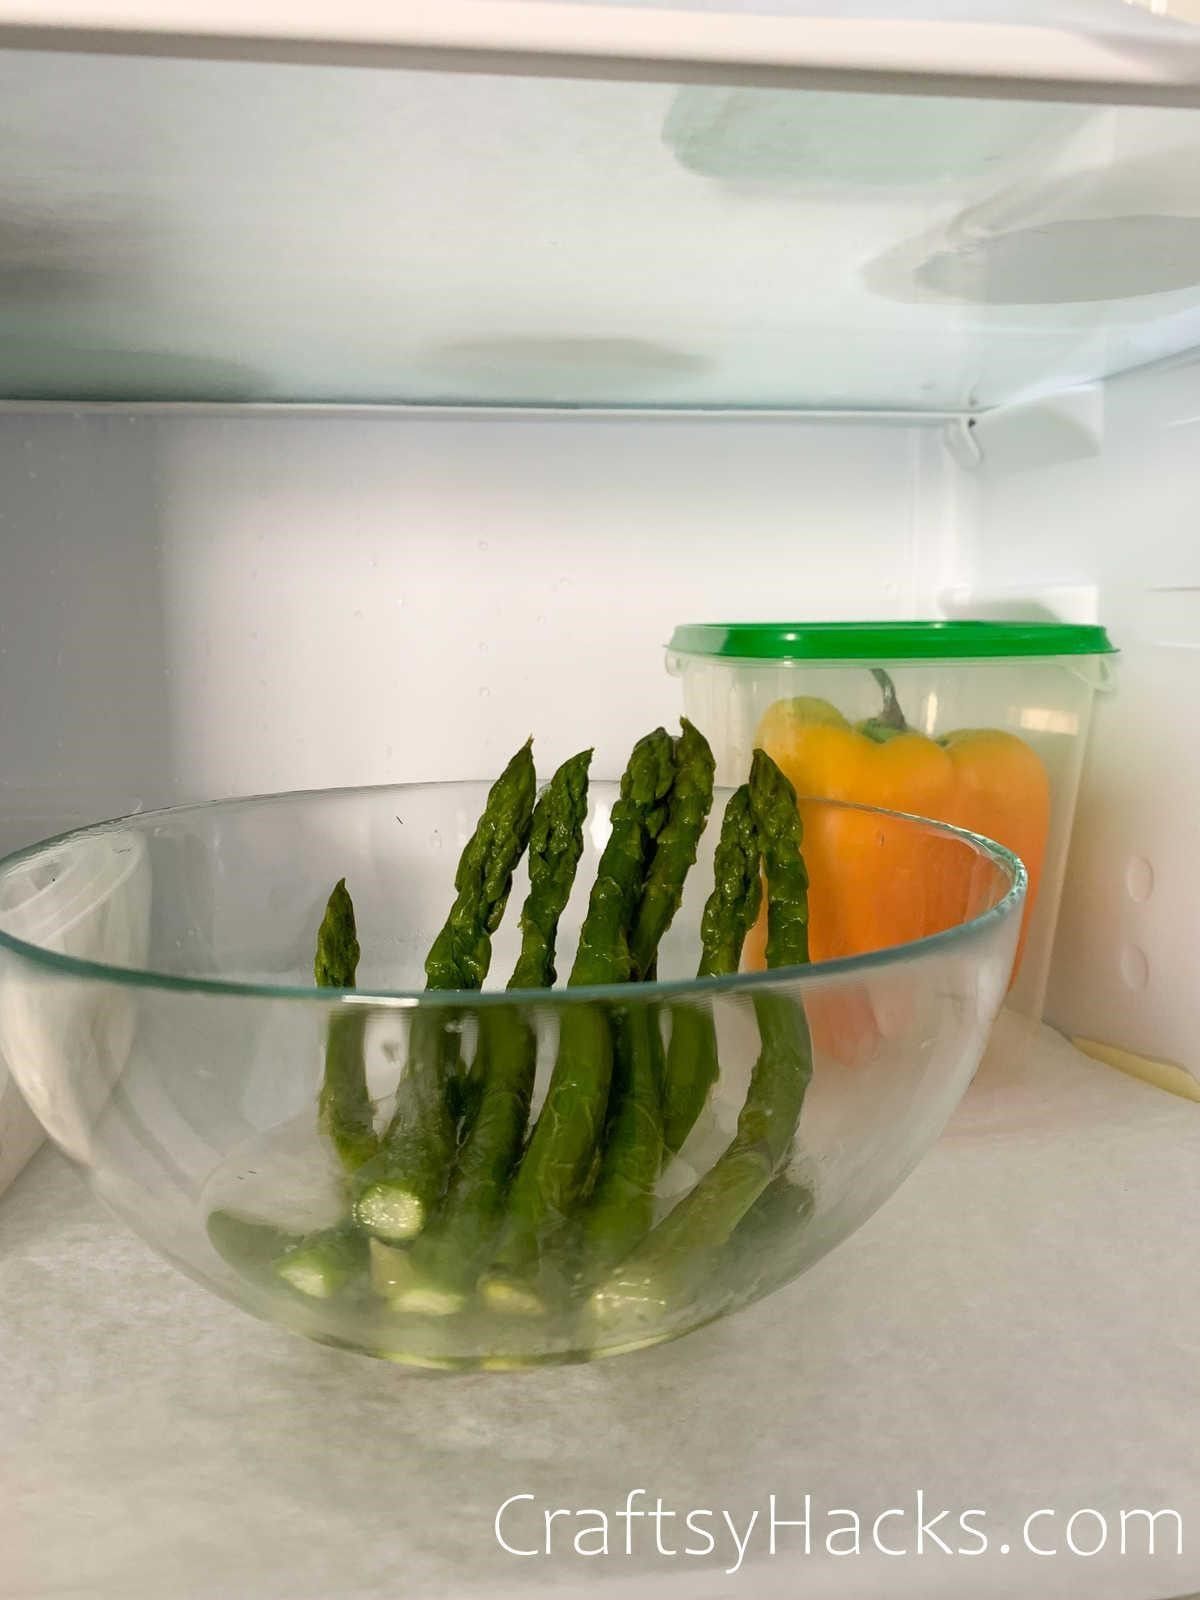 store asparagus in water